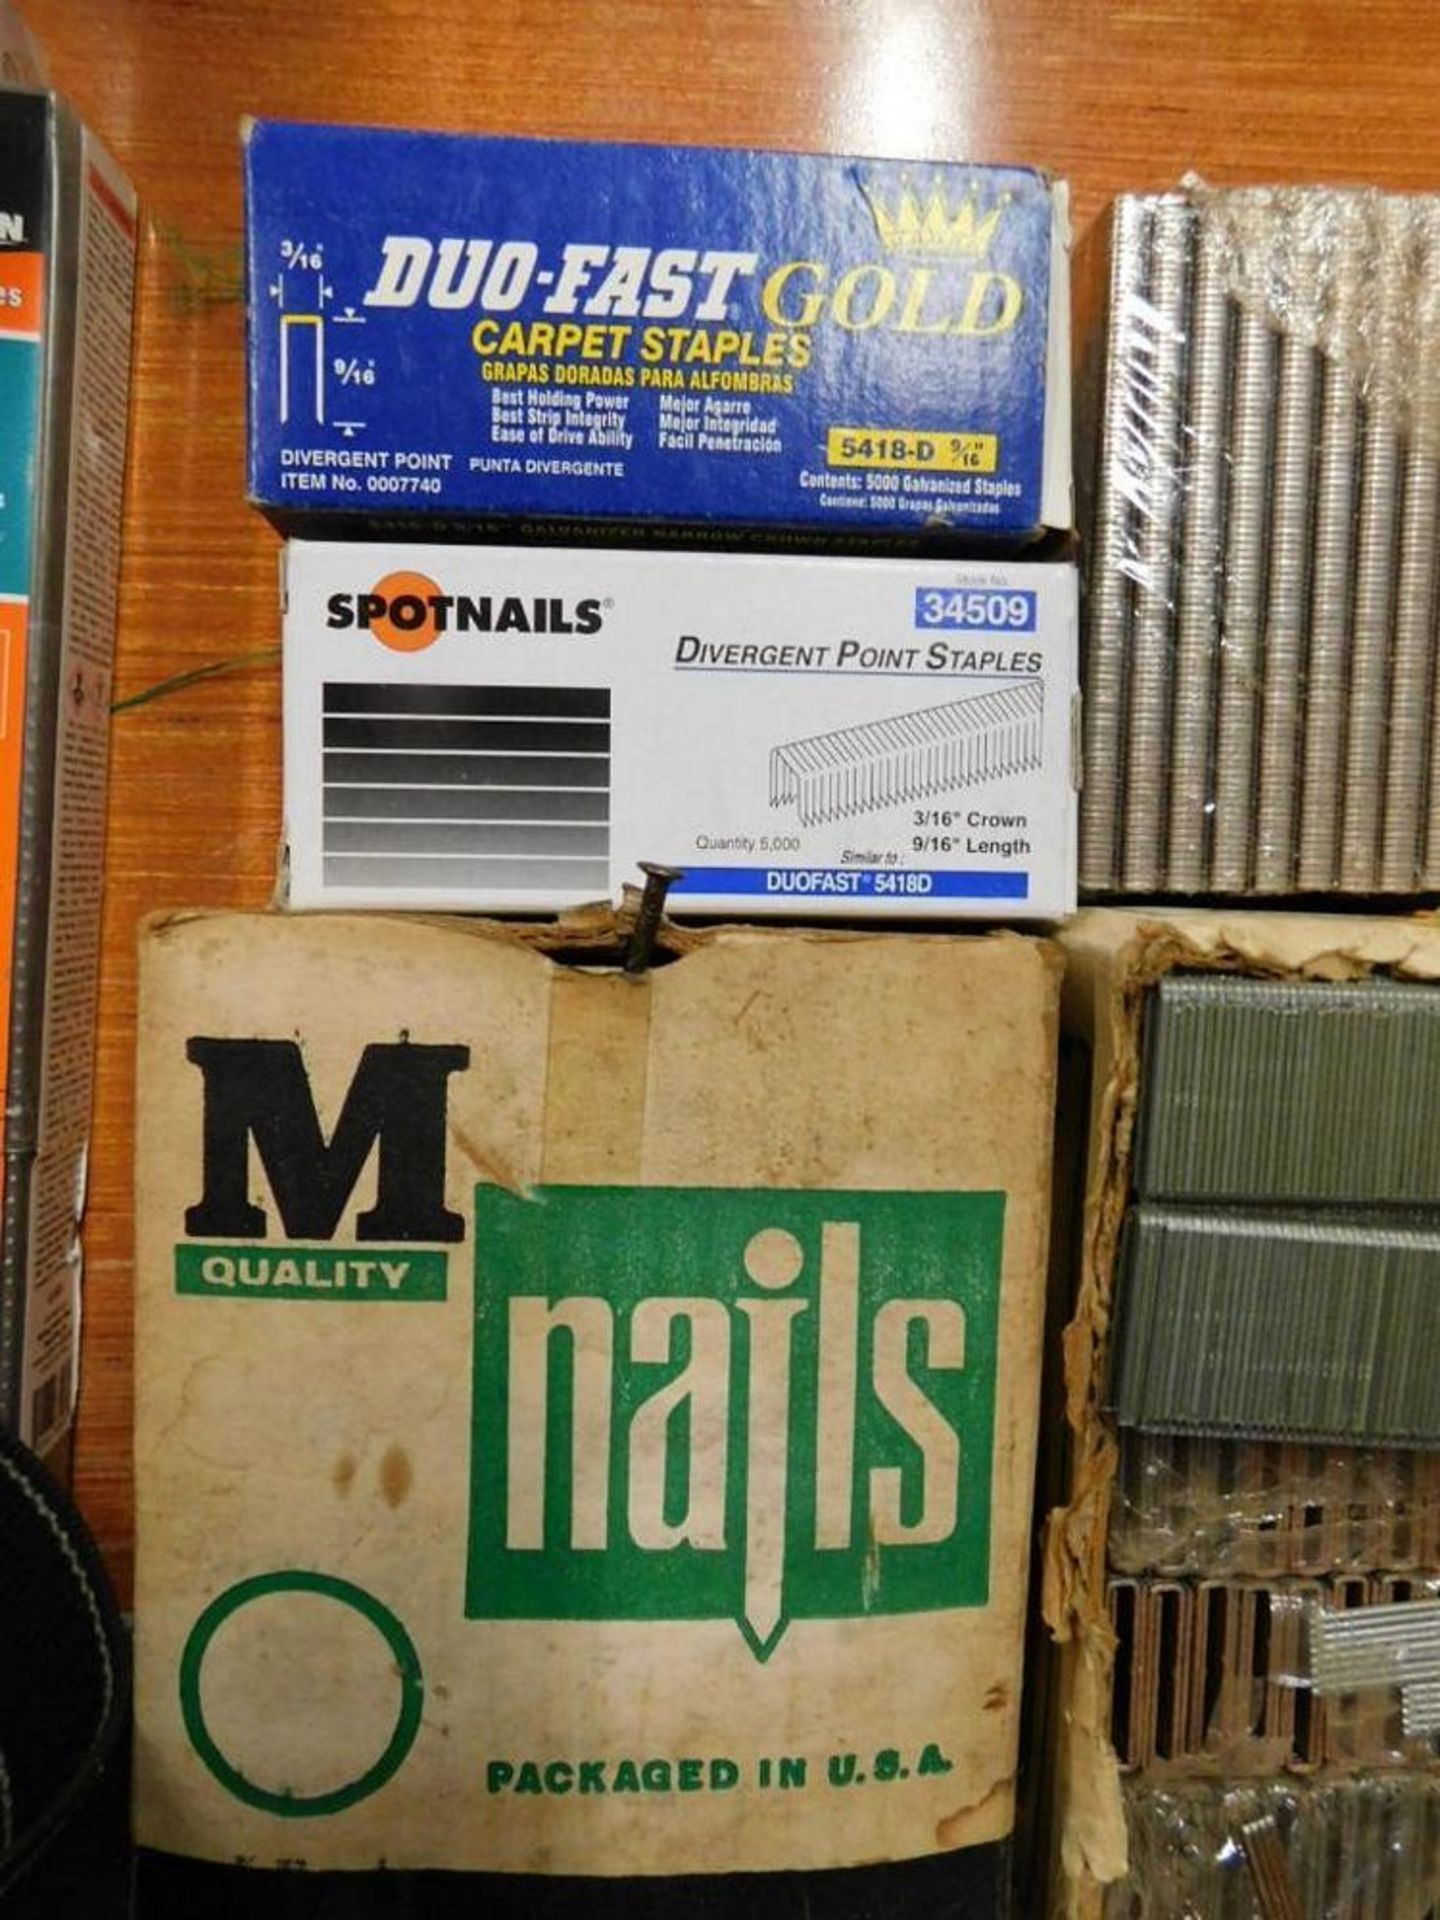 LOT: Assorted Carpet Staples, Staples, Nails (LOCATION: 318 N. Milwaukee Ave., Wheeling, IL 60090) - Image 2 of 3